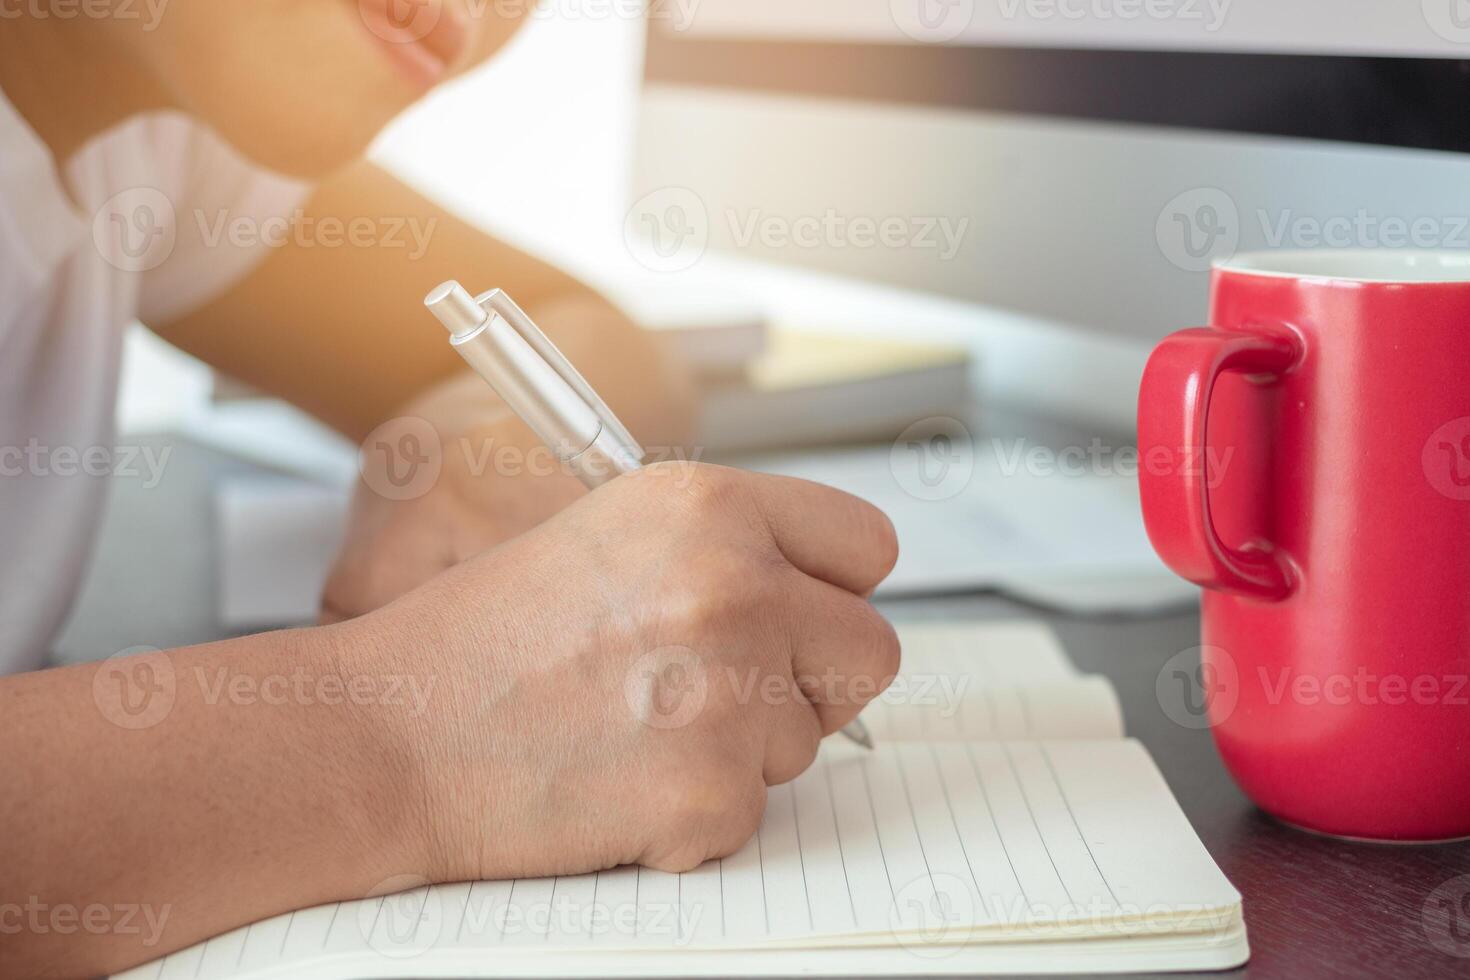 Women working on the desk and desktop computer, notebook, red coffee mug photo